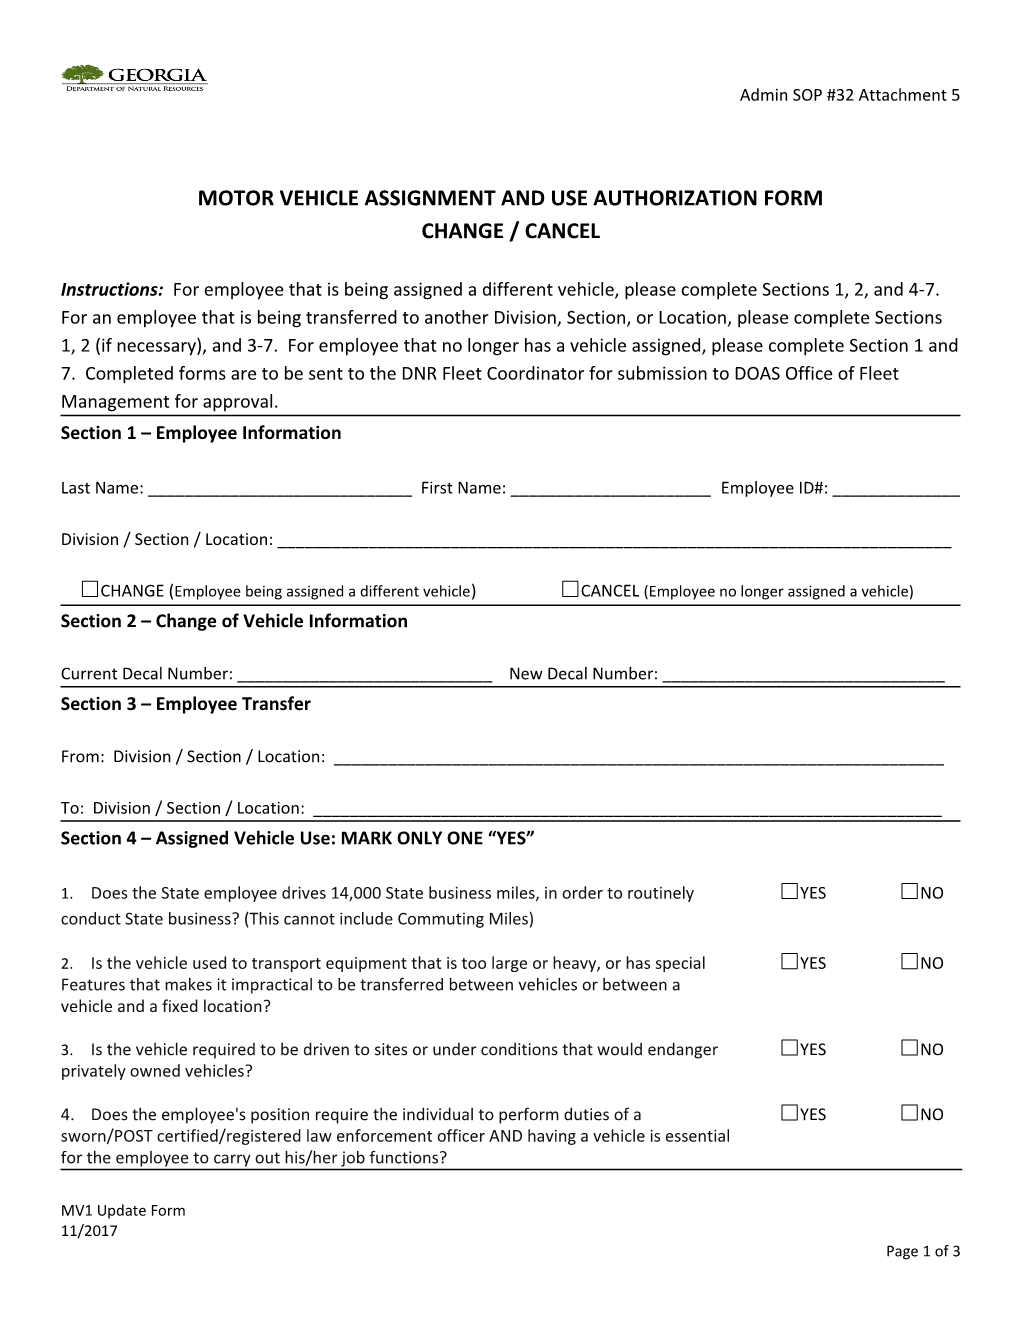 Motor Vehicle Assignment and Use Authorization Form